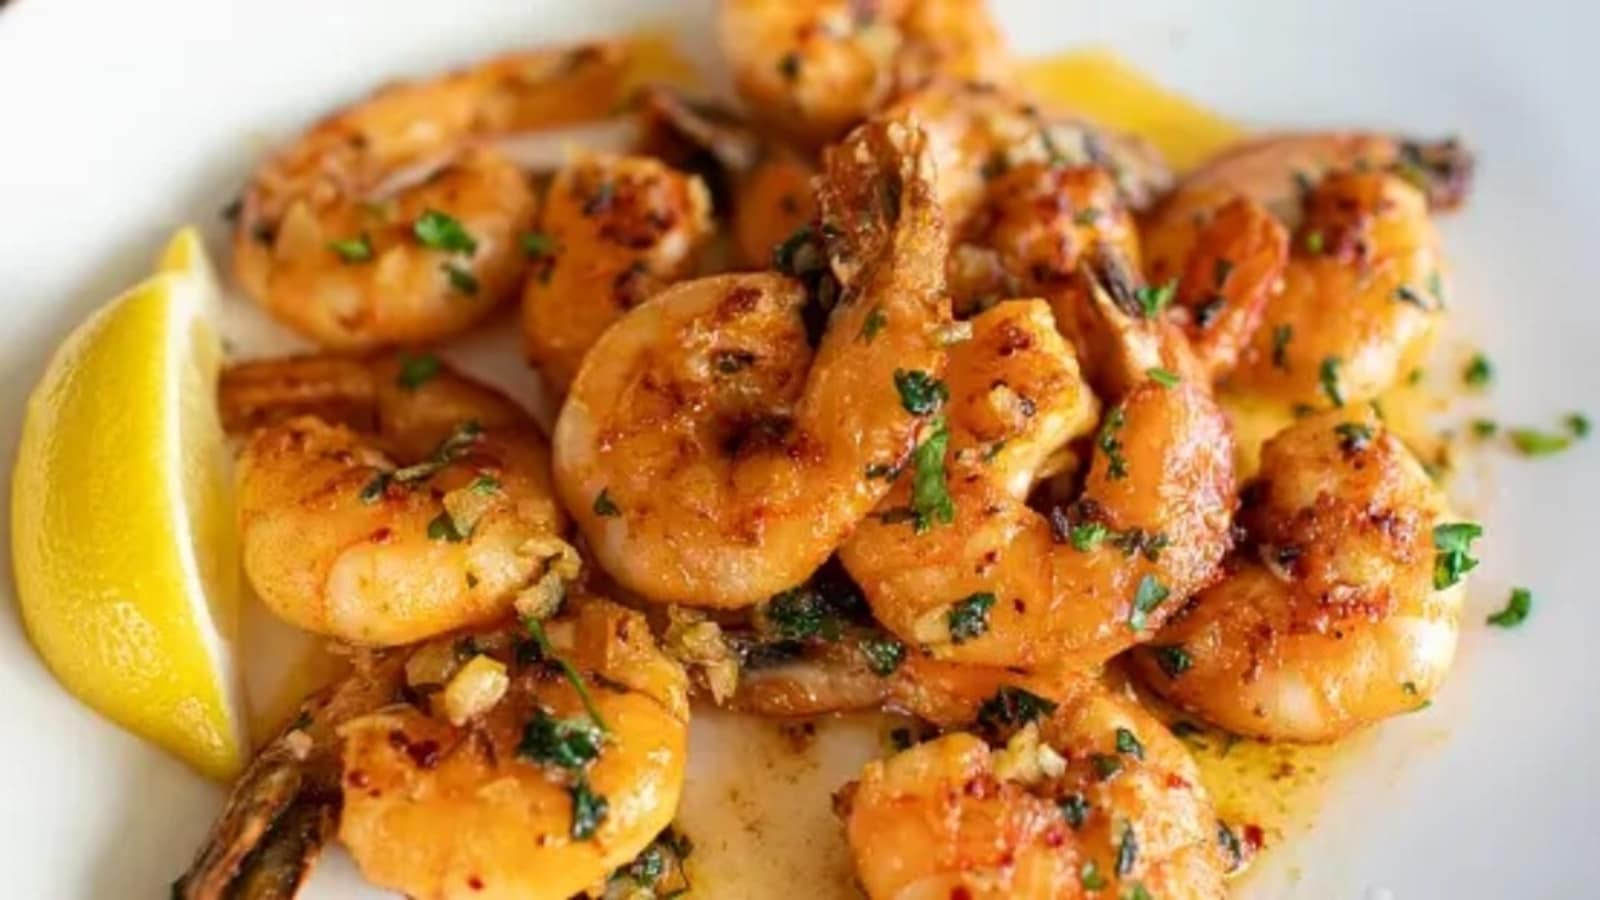 Adding chilli pepper to the food palate: Chilli Garlic shrimps for lunch spread